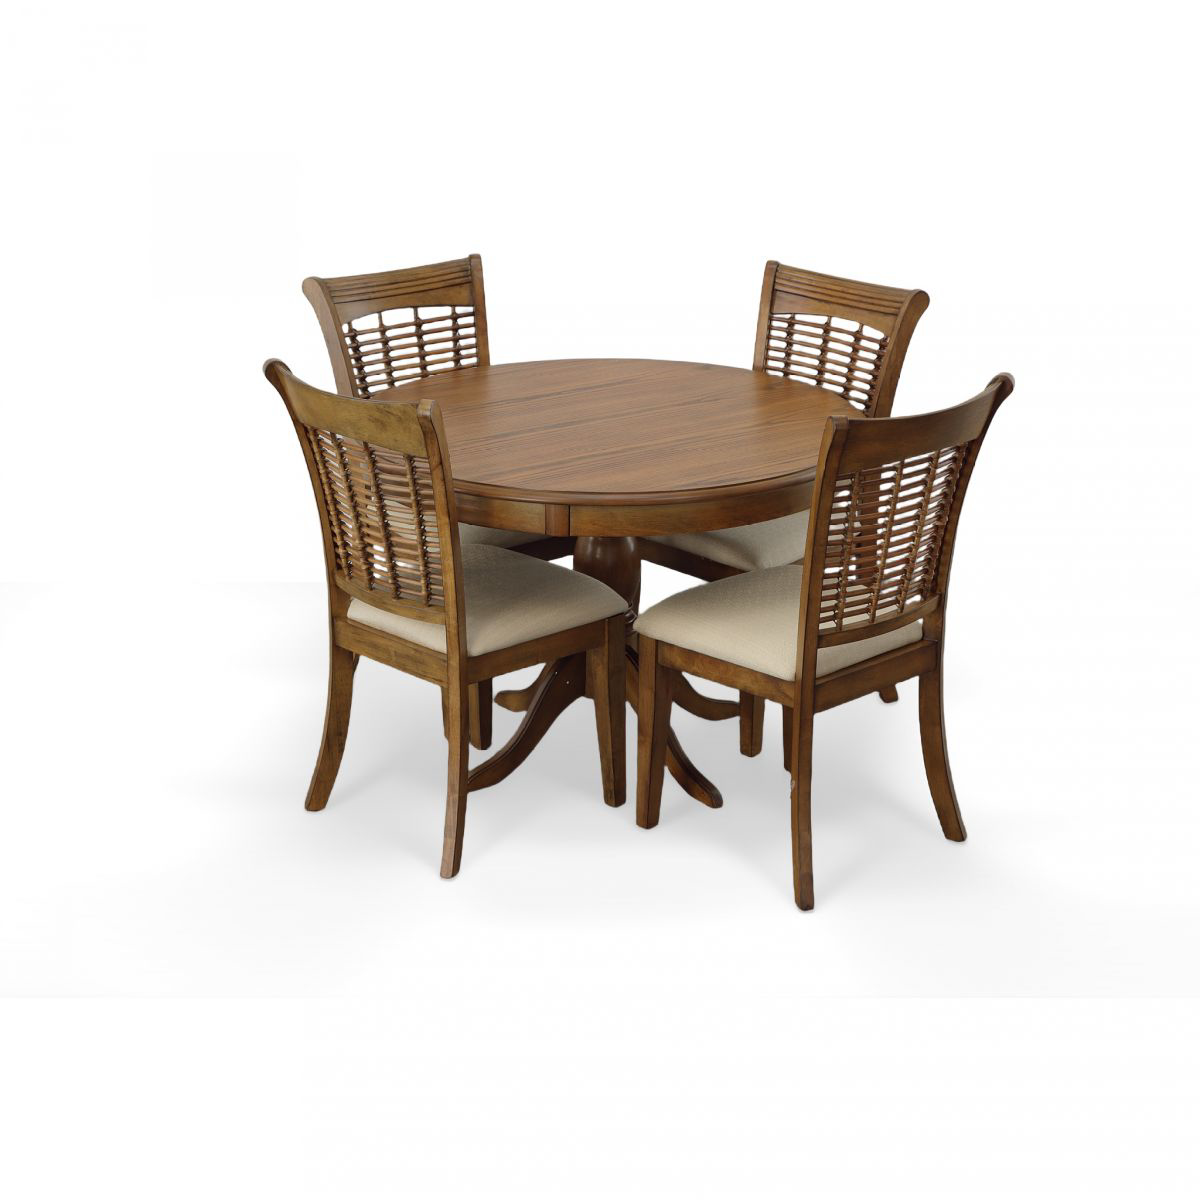 Picture of Bayberry 5 Piece Round Dining Set